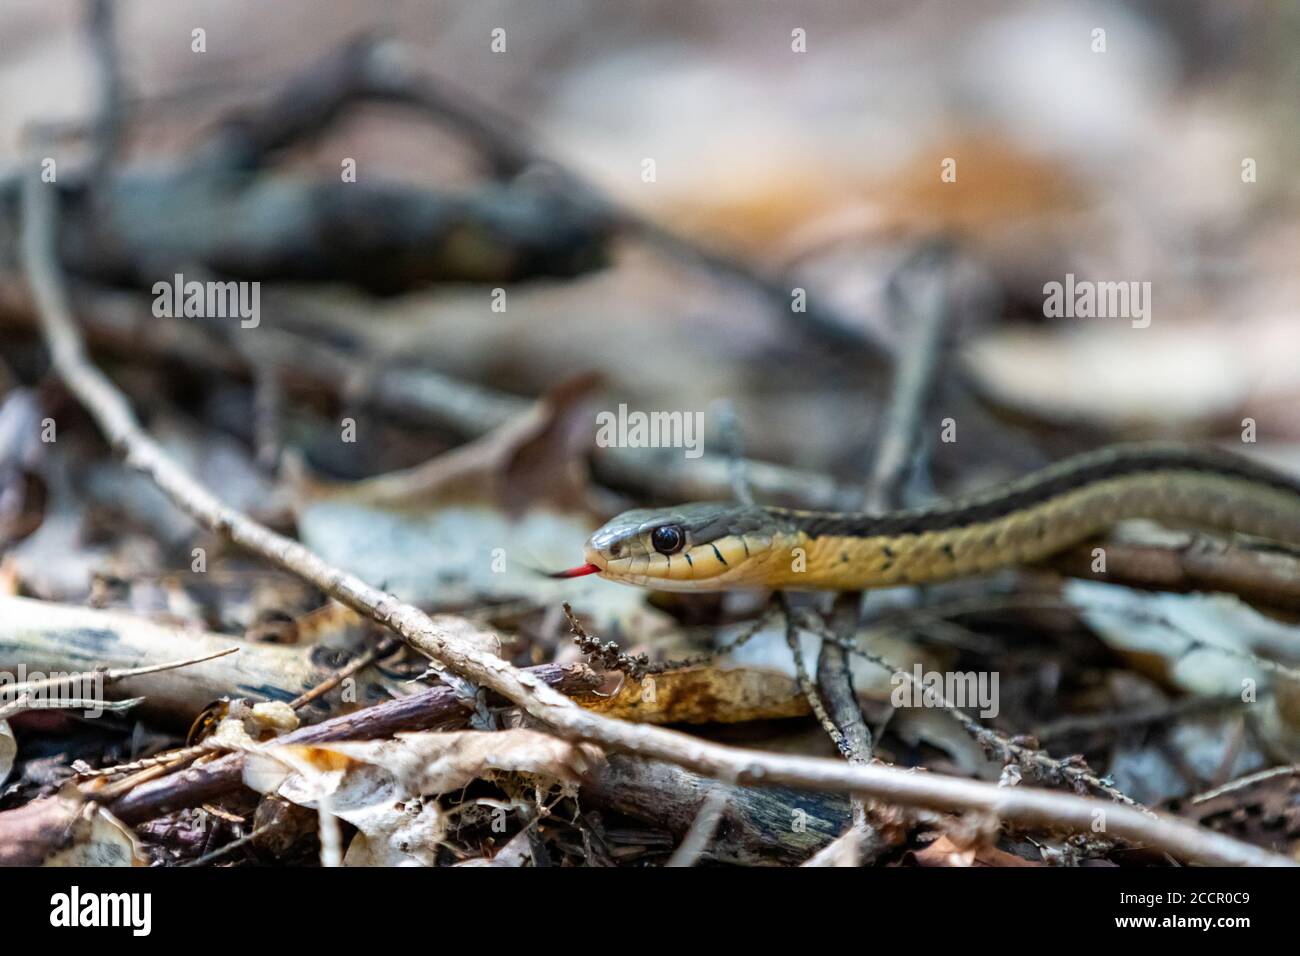 Eastern Garter Snake crawling on forest floor leaflitter with tongue showing close up Stock Photo